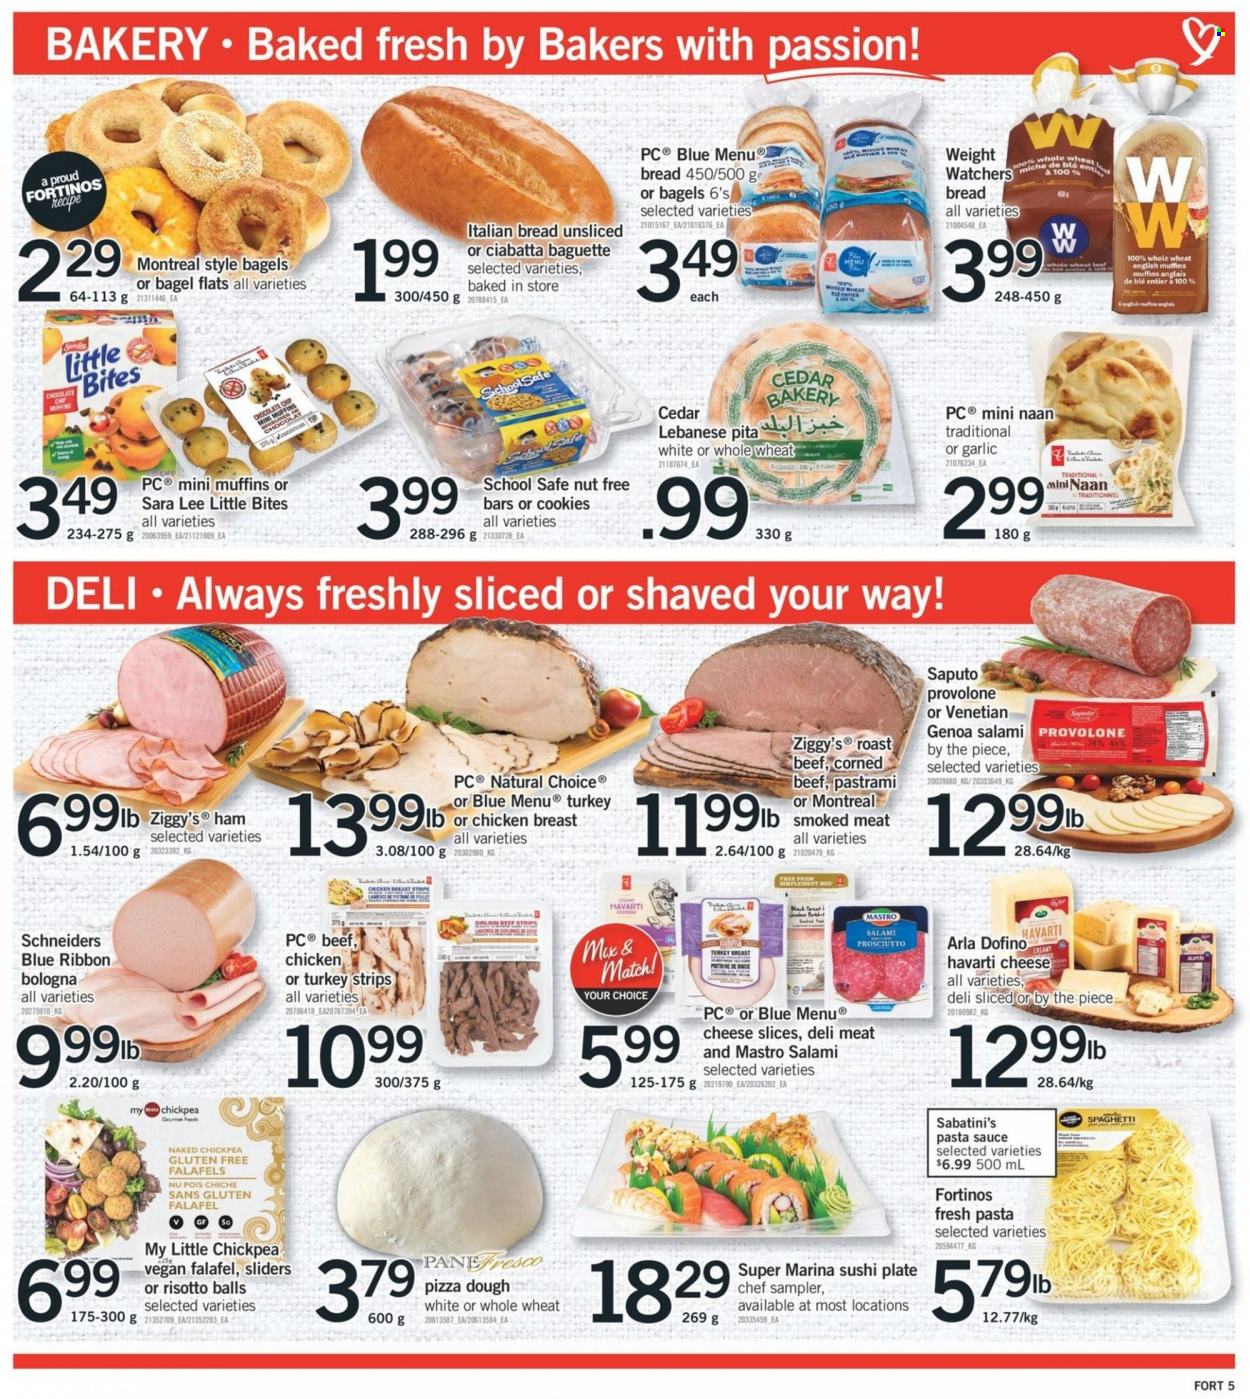 thumbnail - Fortinos Flyer - January 06, 2022 - January 12, 2022 - Sales products - bagels, bread, english muffins, pita, Blue Ribbon, Sara Lee, garlic, spaghetti, pasta sauce, sauce, salami, ham, prosciutto, pastrami, bologna sausage, corned beef, sliced cheese, Havarti, Provolone, Arla, pizza dough, strips, cookies, chocolate, Little Bites, turkey breast, chicken, turkey, beef meat, roast beef, plate, Bakers, baguette, ciabatta. Page 8.